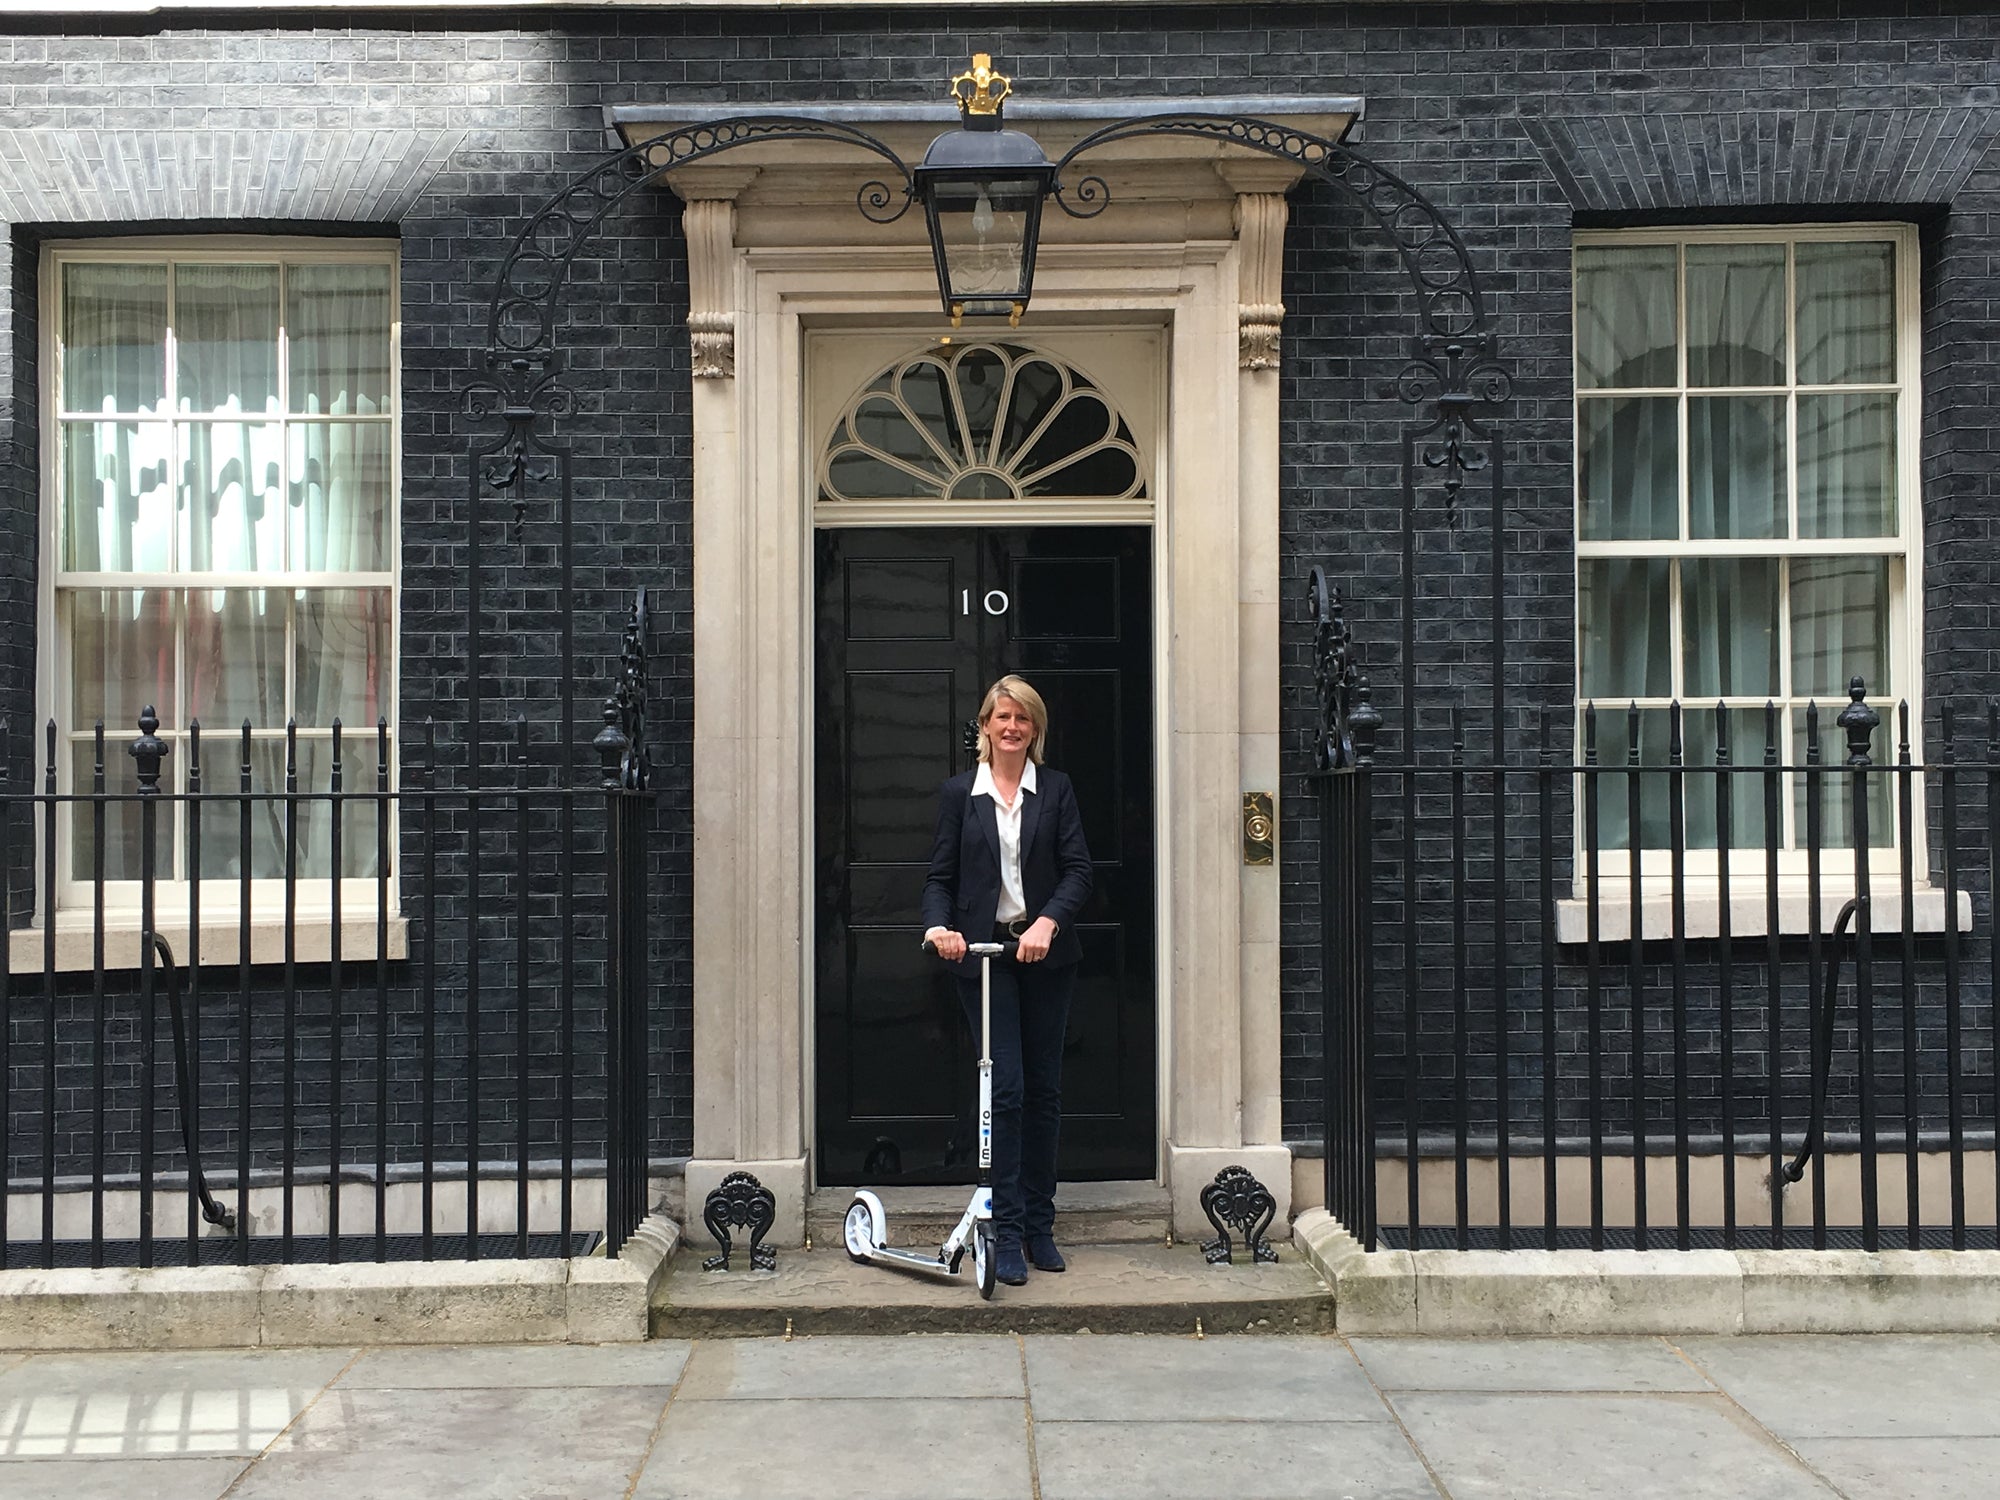 A scoot to 10 Downing Street